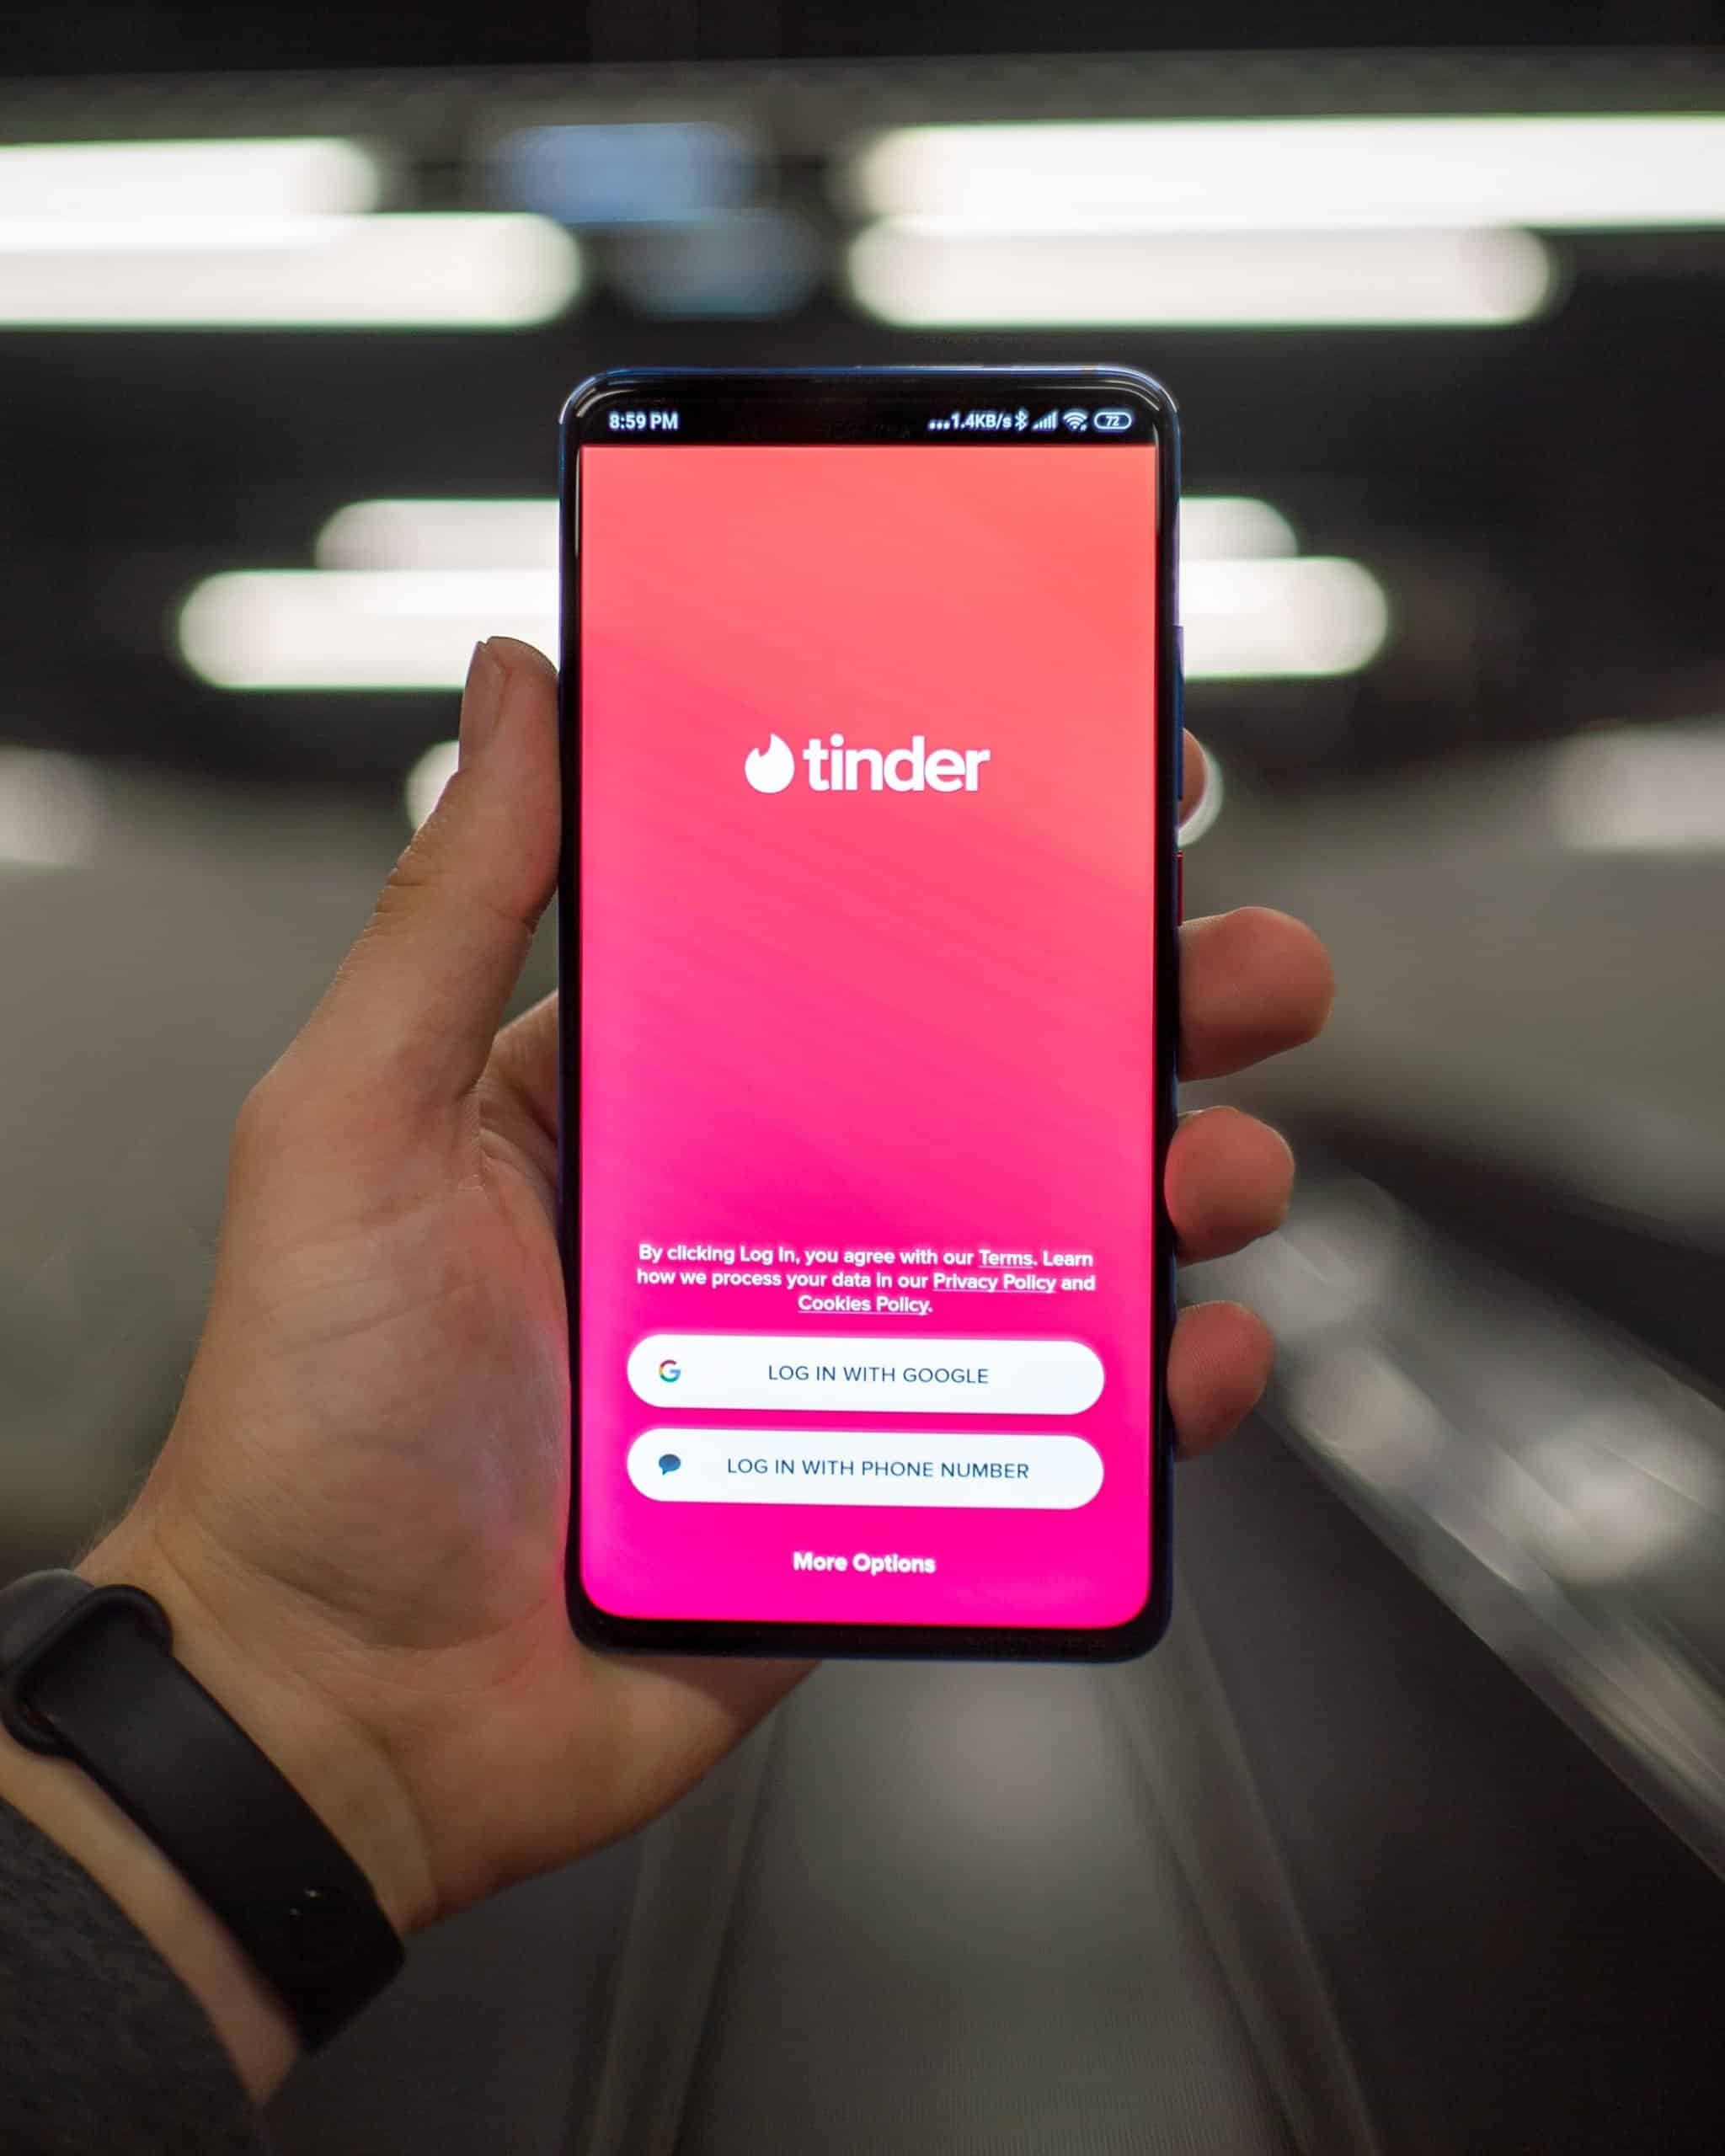 A phone showing the Tinder app